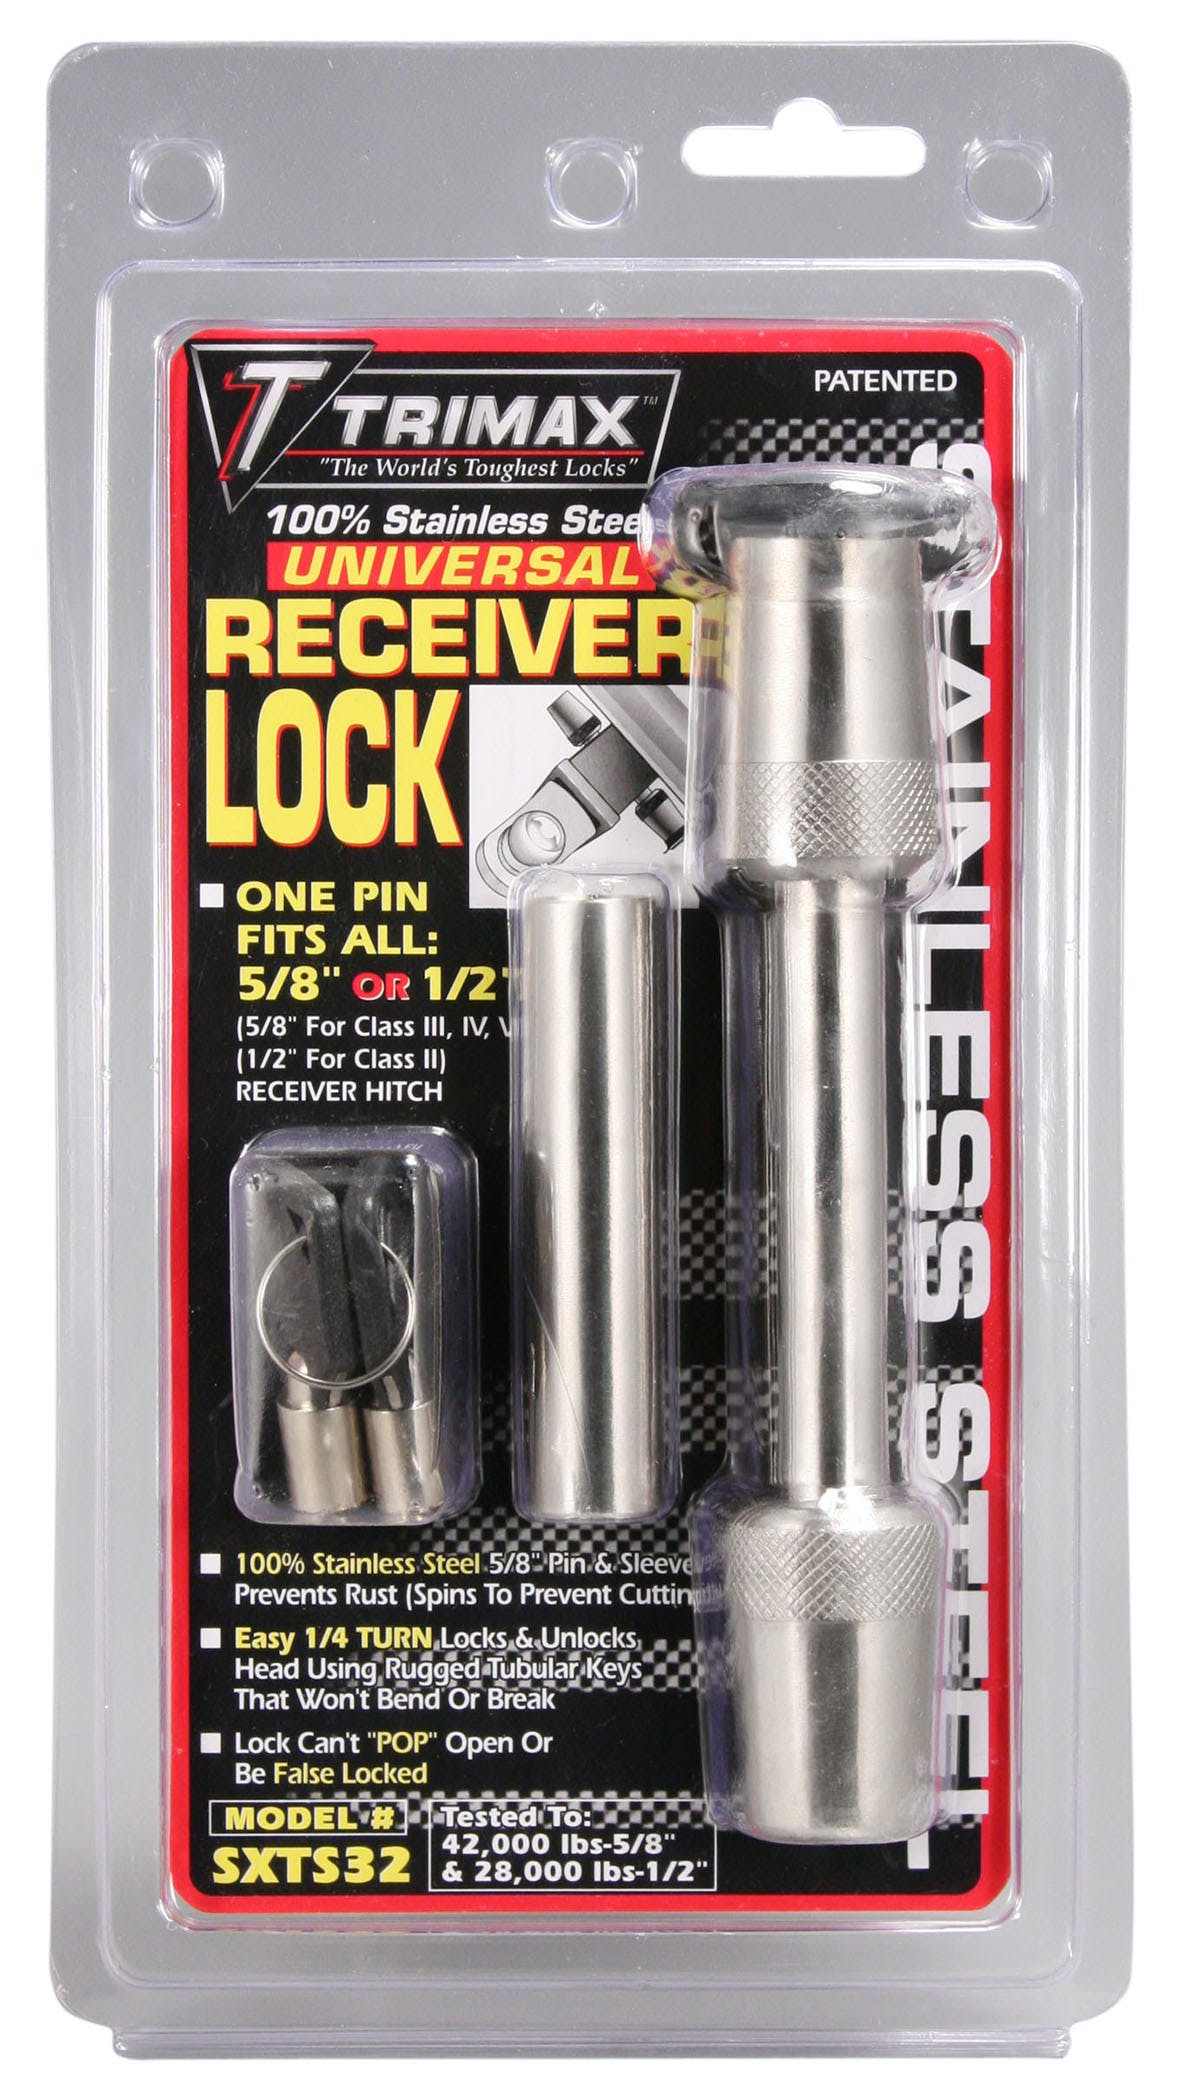 TRIMAX SXTS32 Premium 100% Stainless Steel Receiver Lock - Fits 1/2: And 5/8 inch